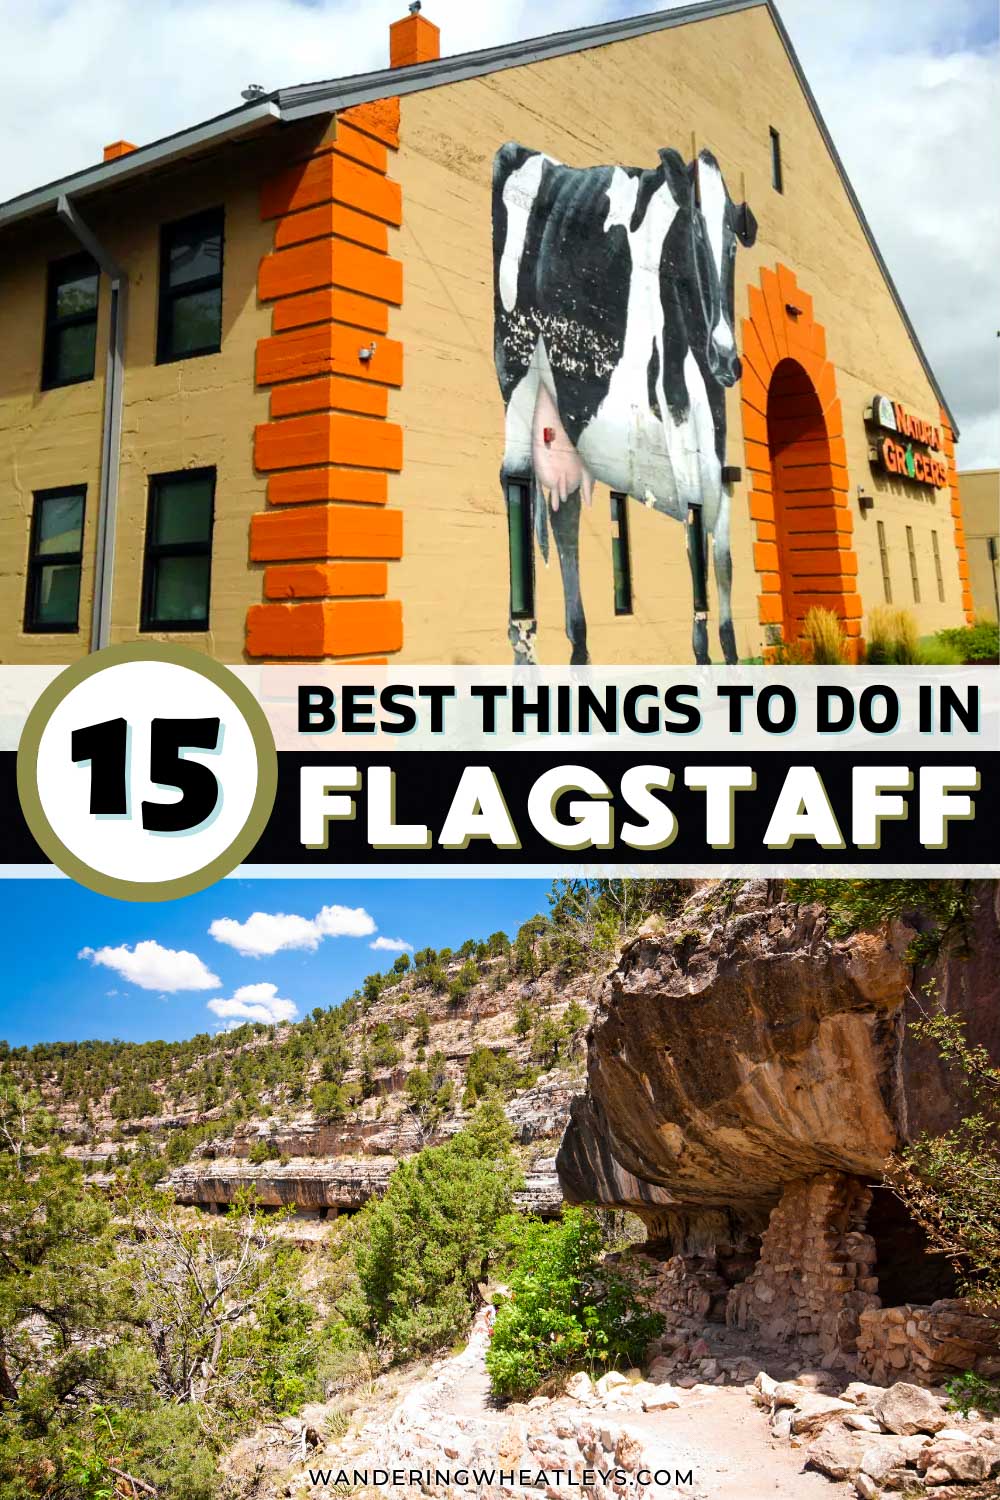 The Best Things to do in Flagstaff, Arizona